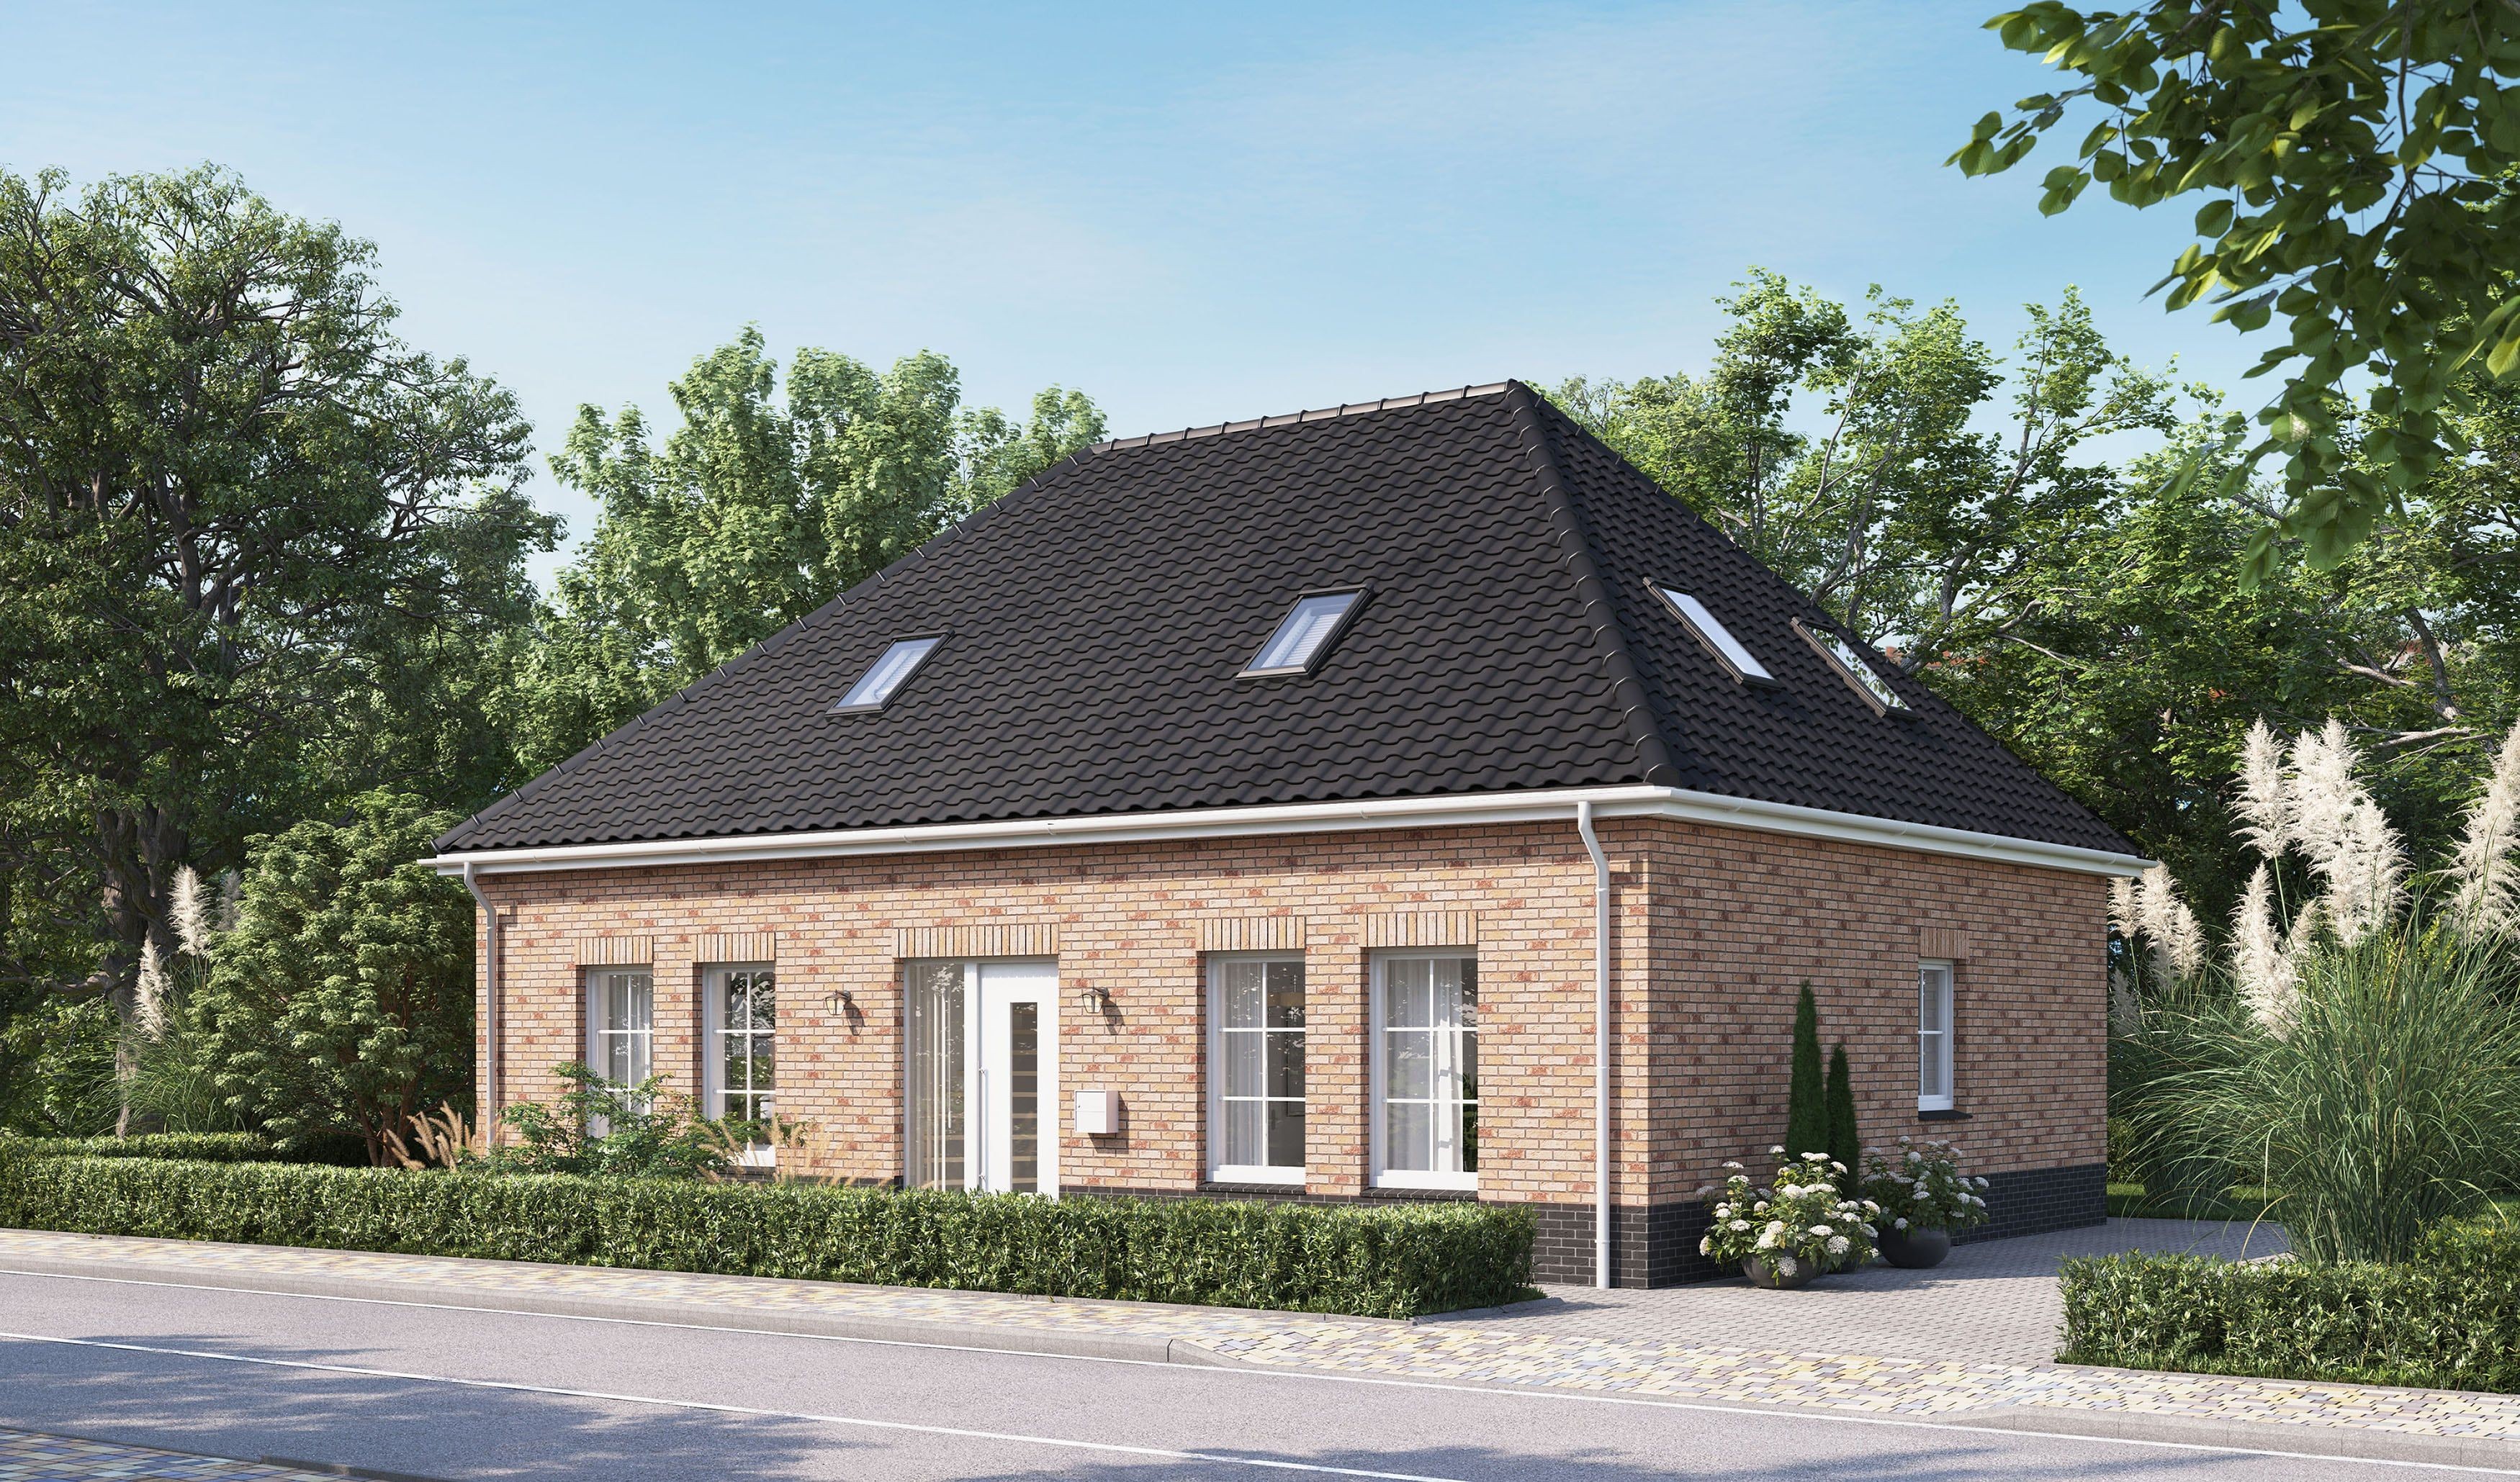 3D Visualization of Catalogue Family House with garden in Germany, Switzerland, Holland and Europe